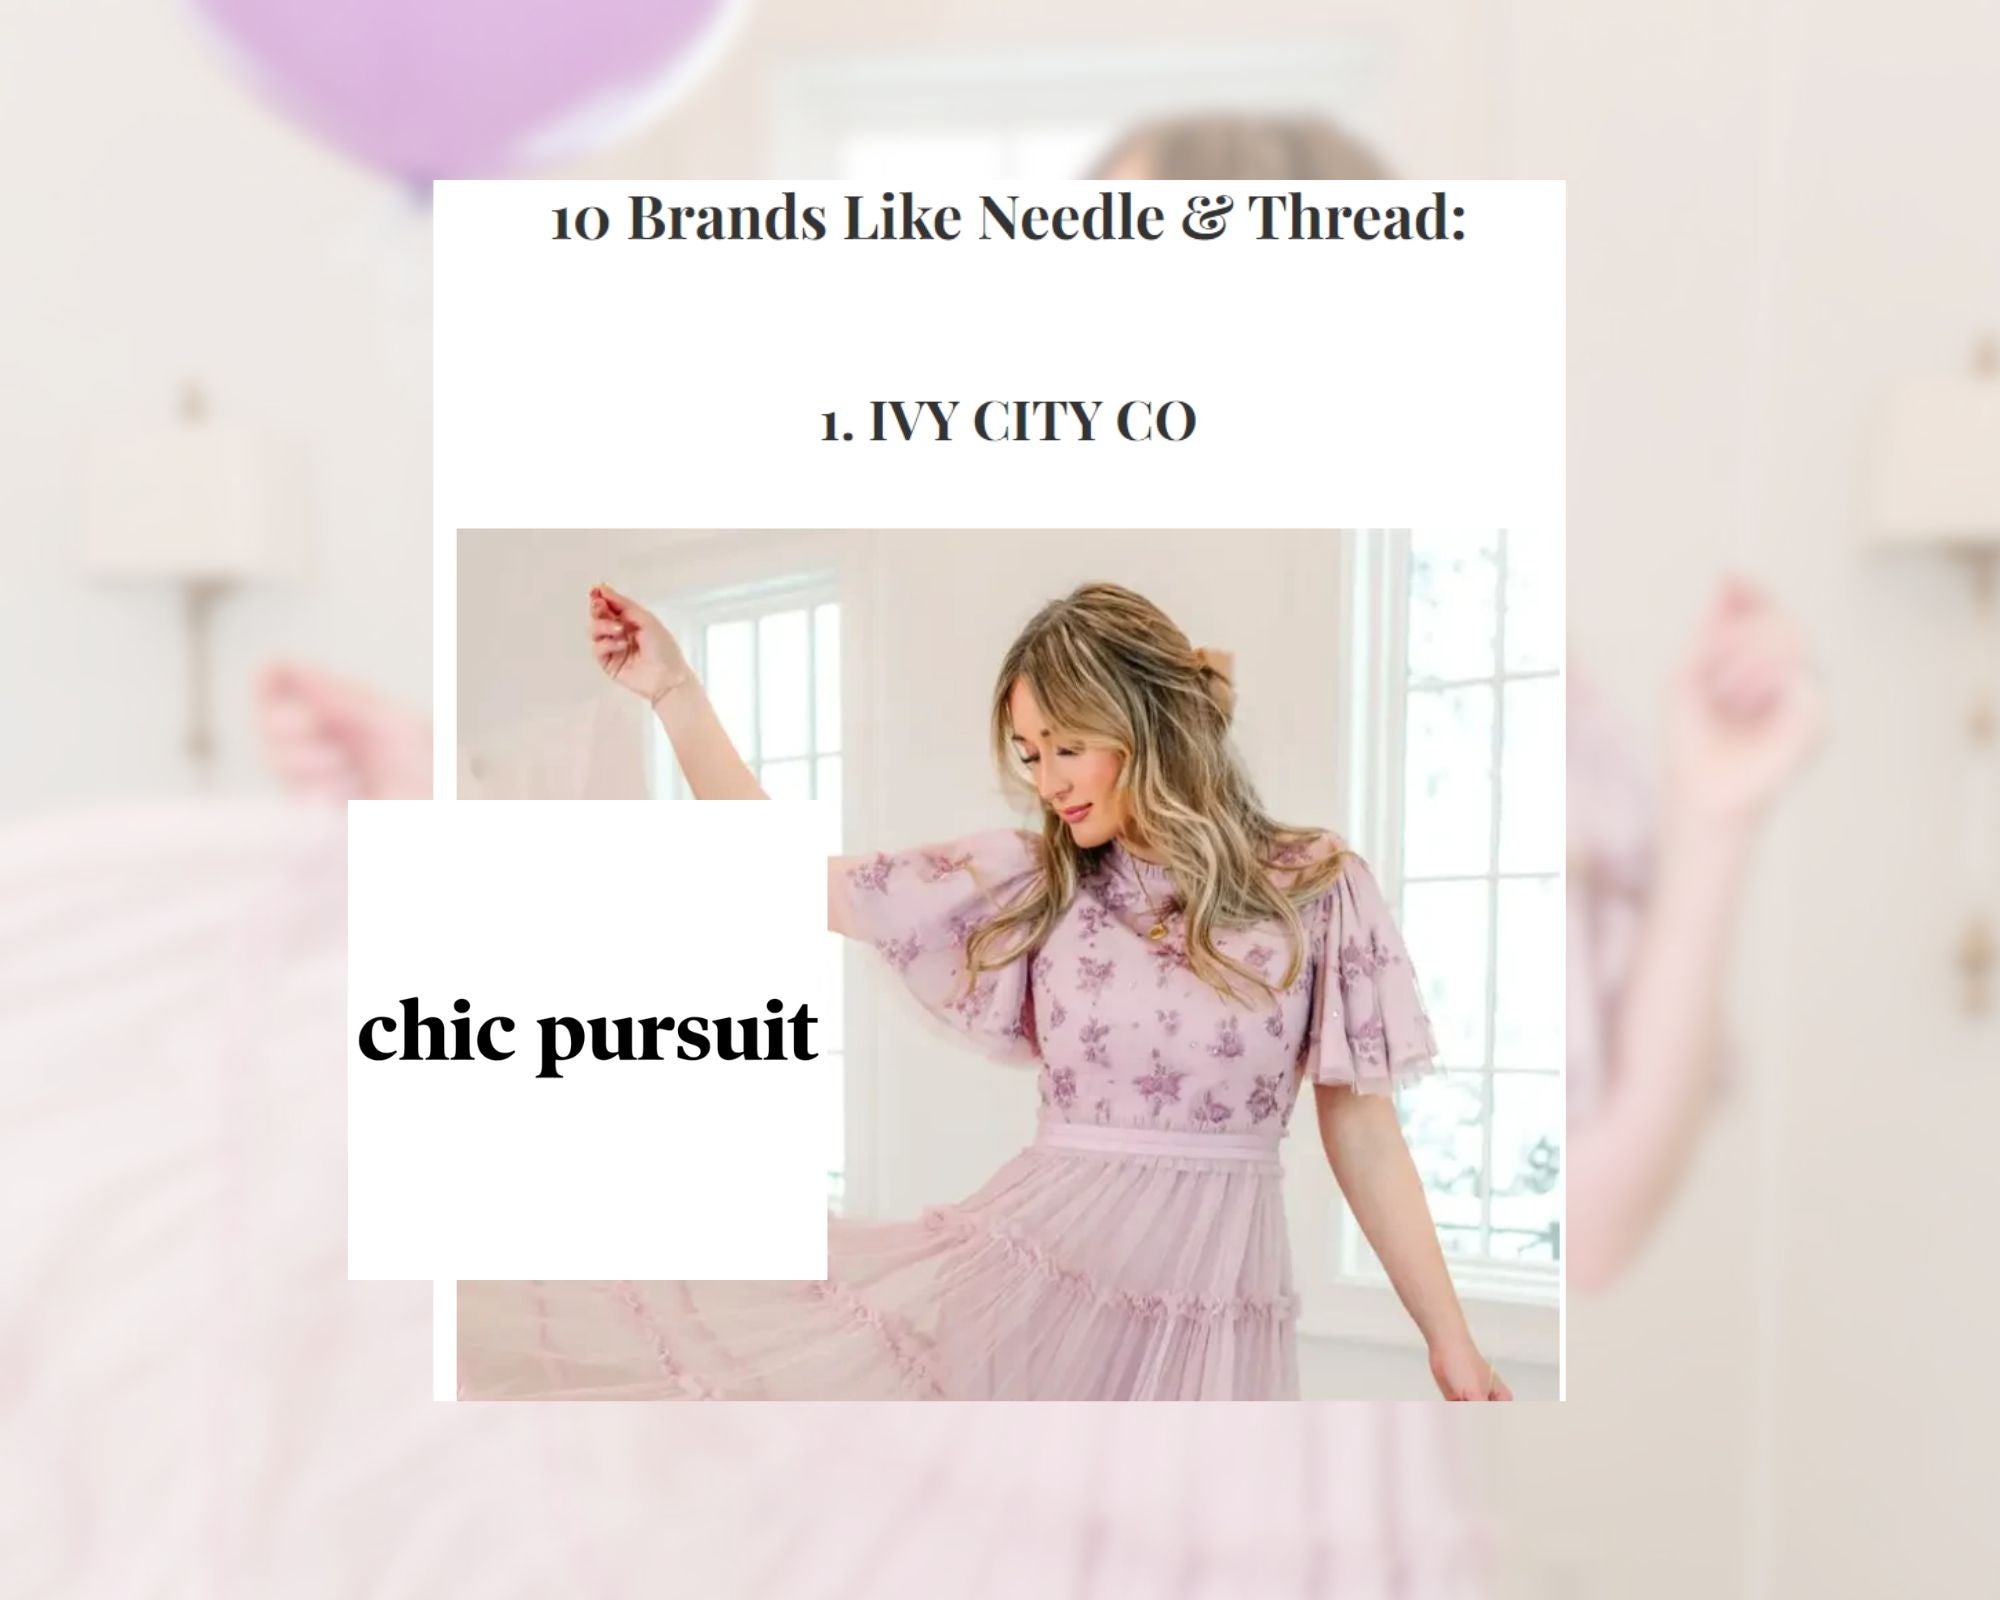 10 Brands like Needle & Thread For The Party Season – Ivy City Co